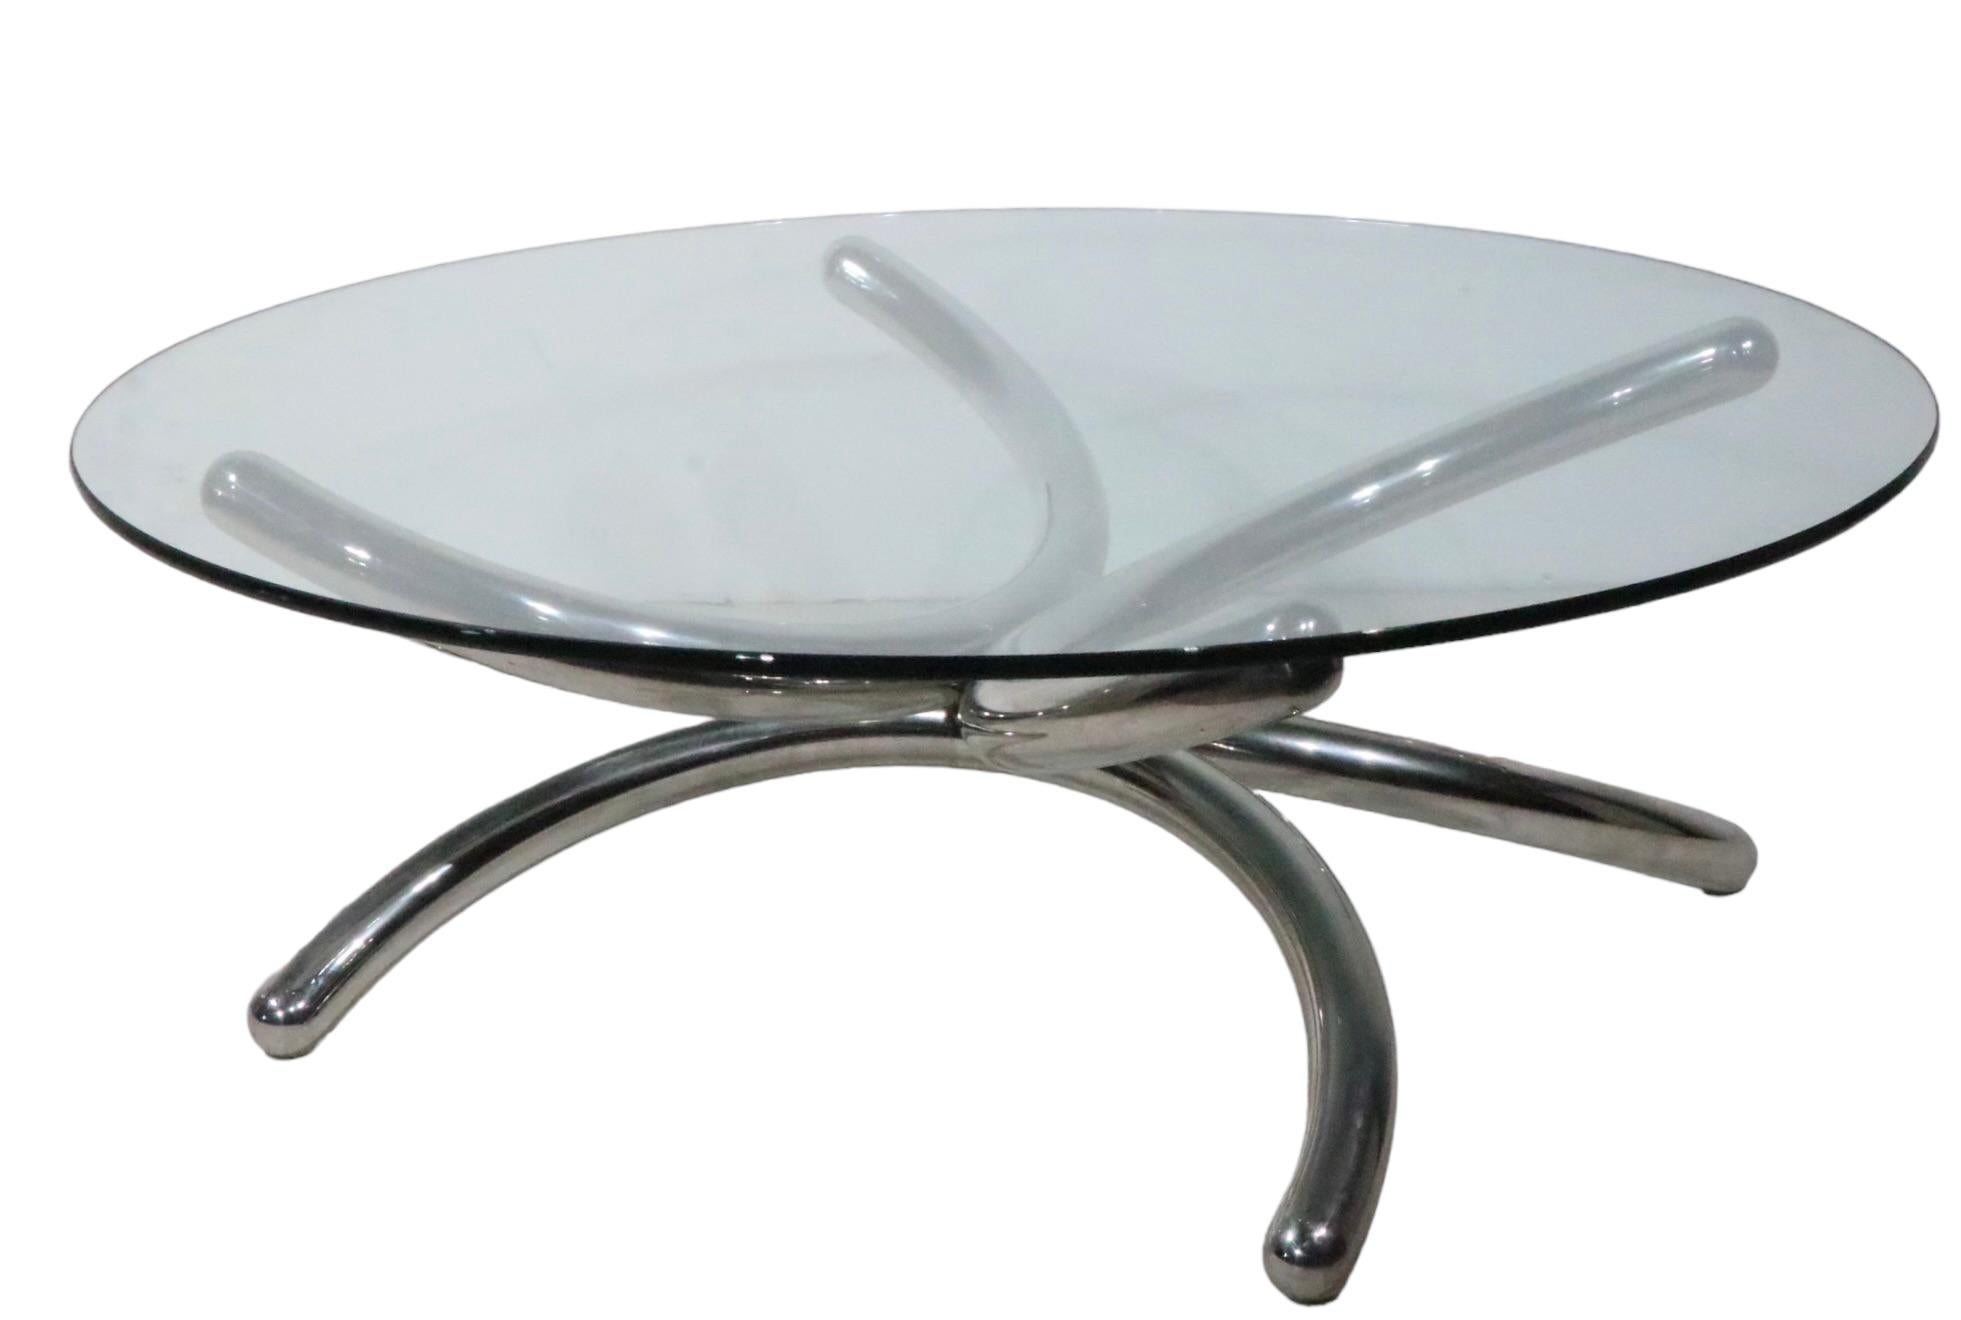  Round Chrome and Glass Coffee Cocktail Table c 1960/70s possibly Paul Tuttle  For Sale 9